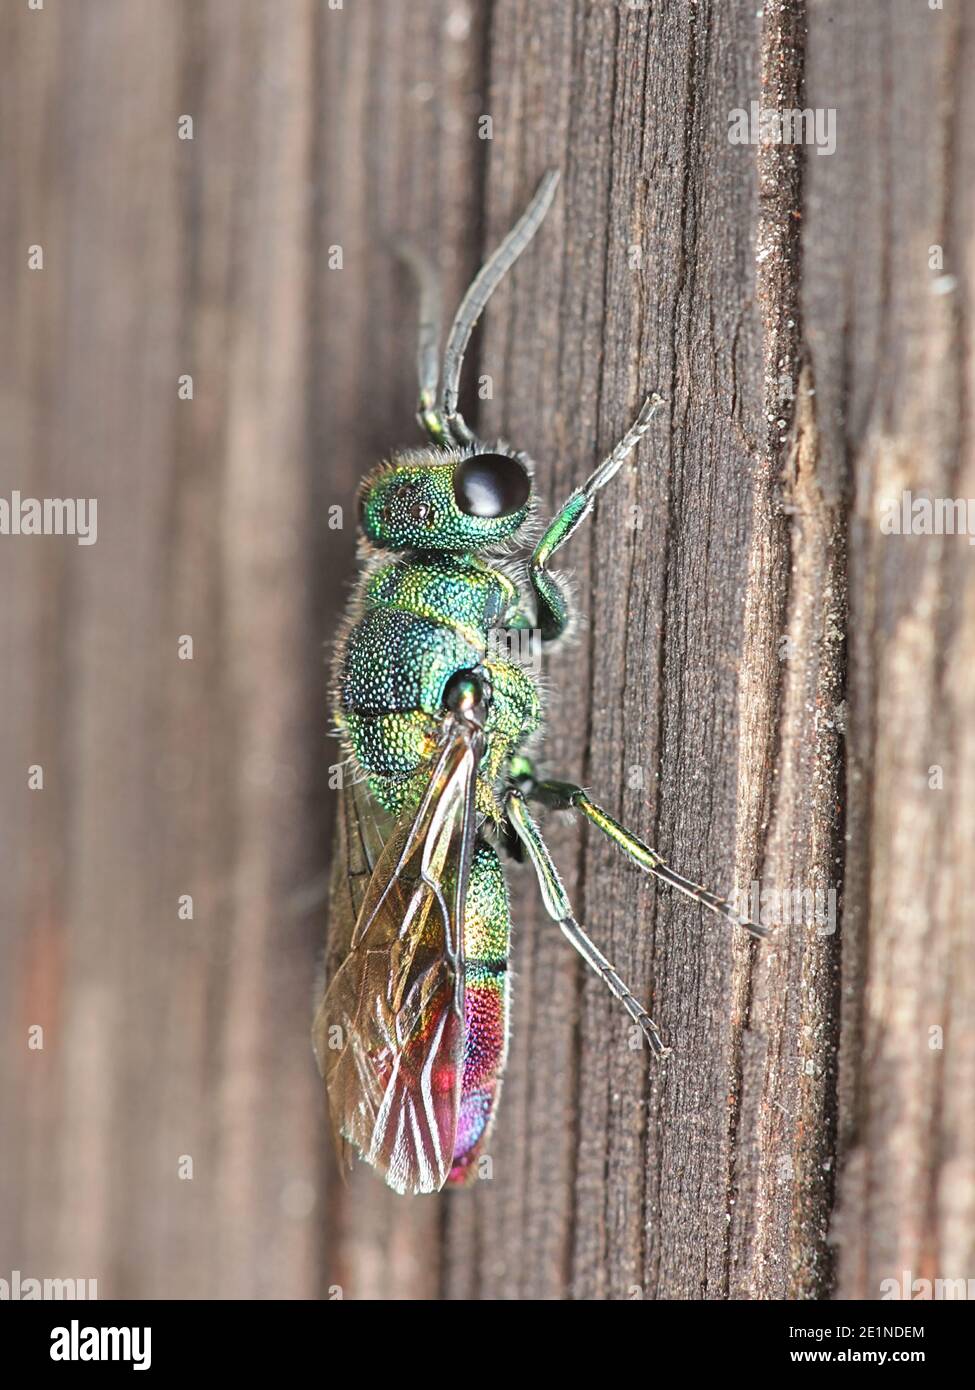 Cuckoo wasp, also called emerald wasp, a colorful insect of the hymenopteran family Chrysididae Stock Photo